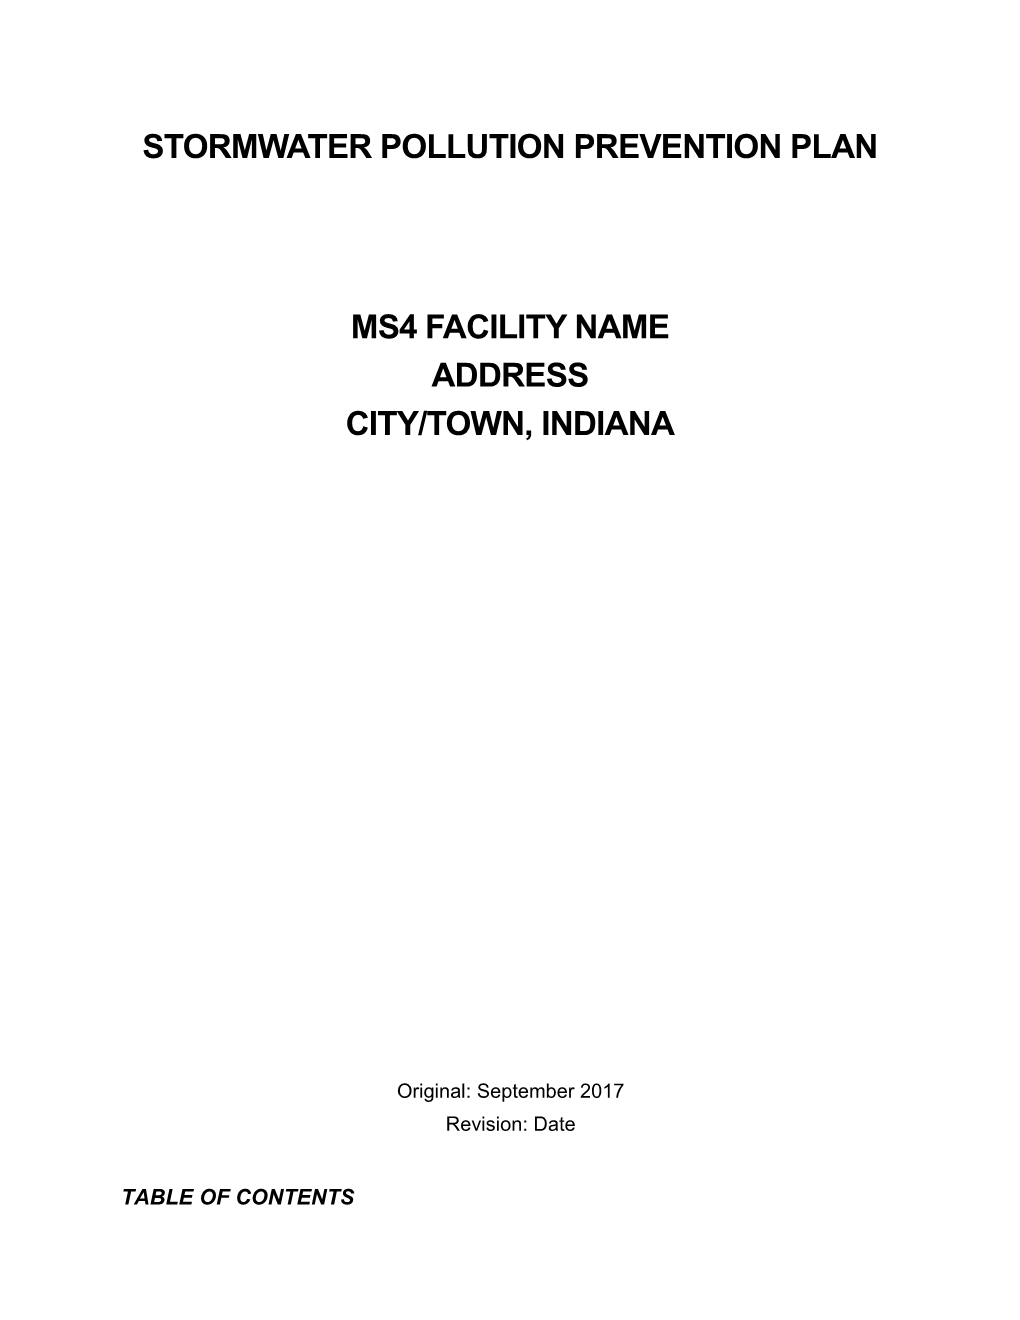 Industrial Stormwater Pollution Prevention Plan Template s2